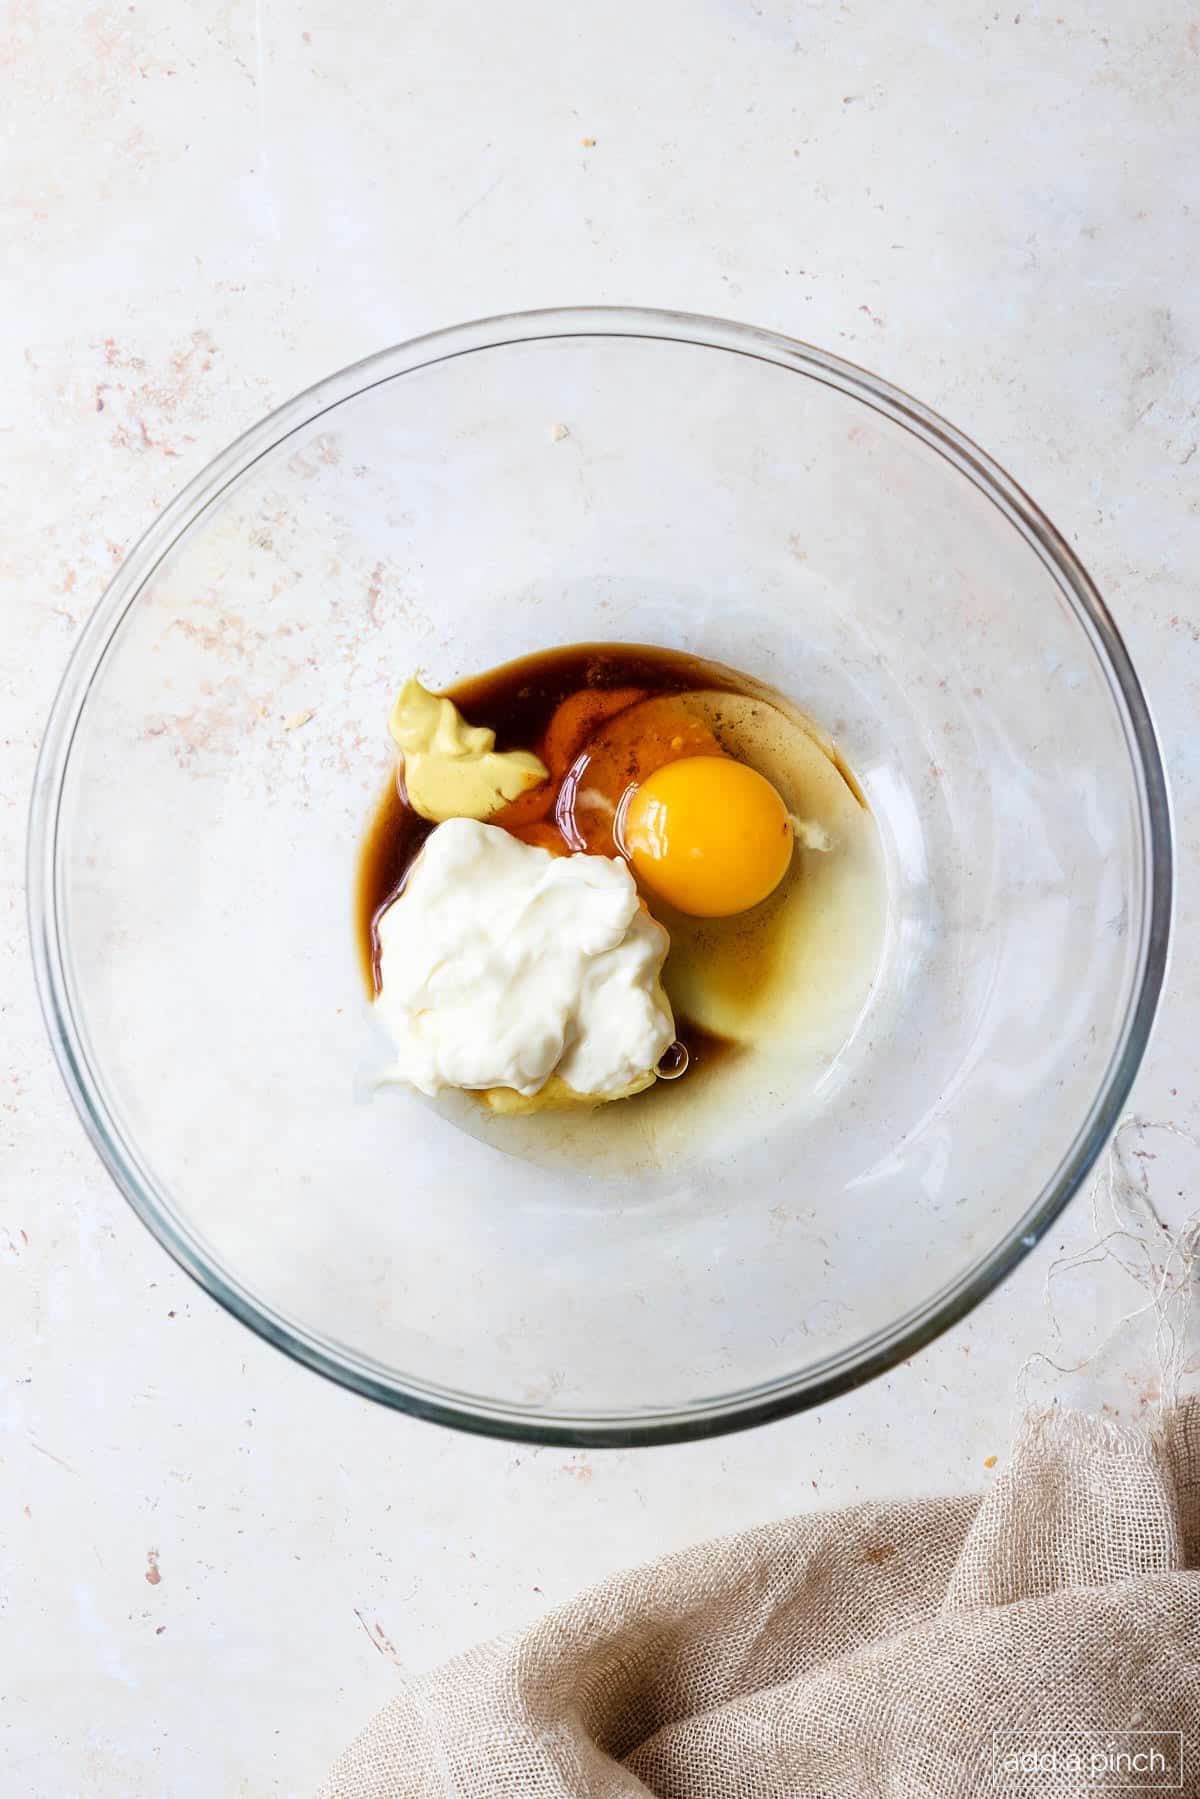 Mayo, dijon mustard, egg, and sauces in a glass bowl.